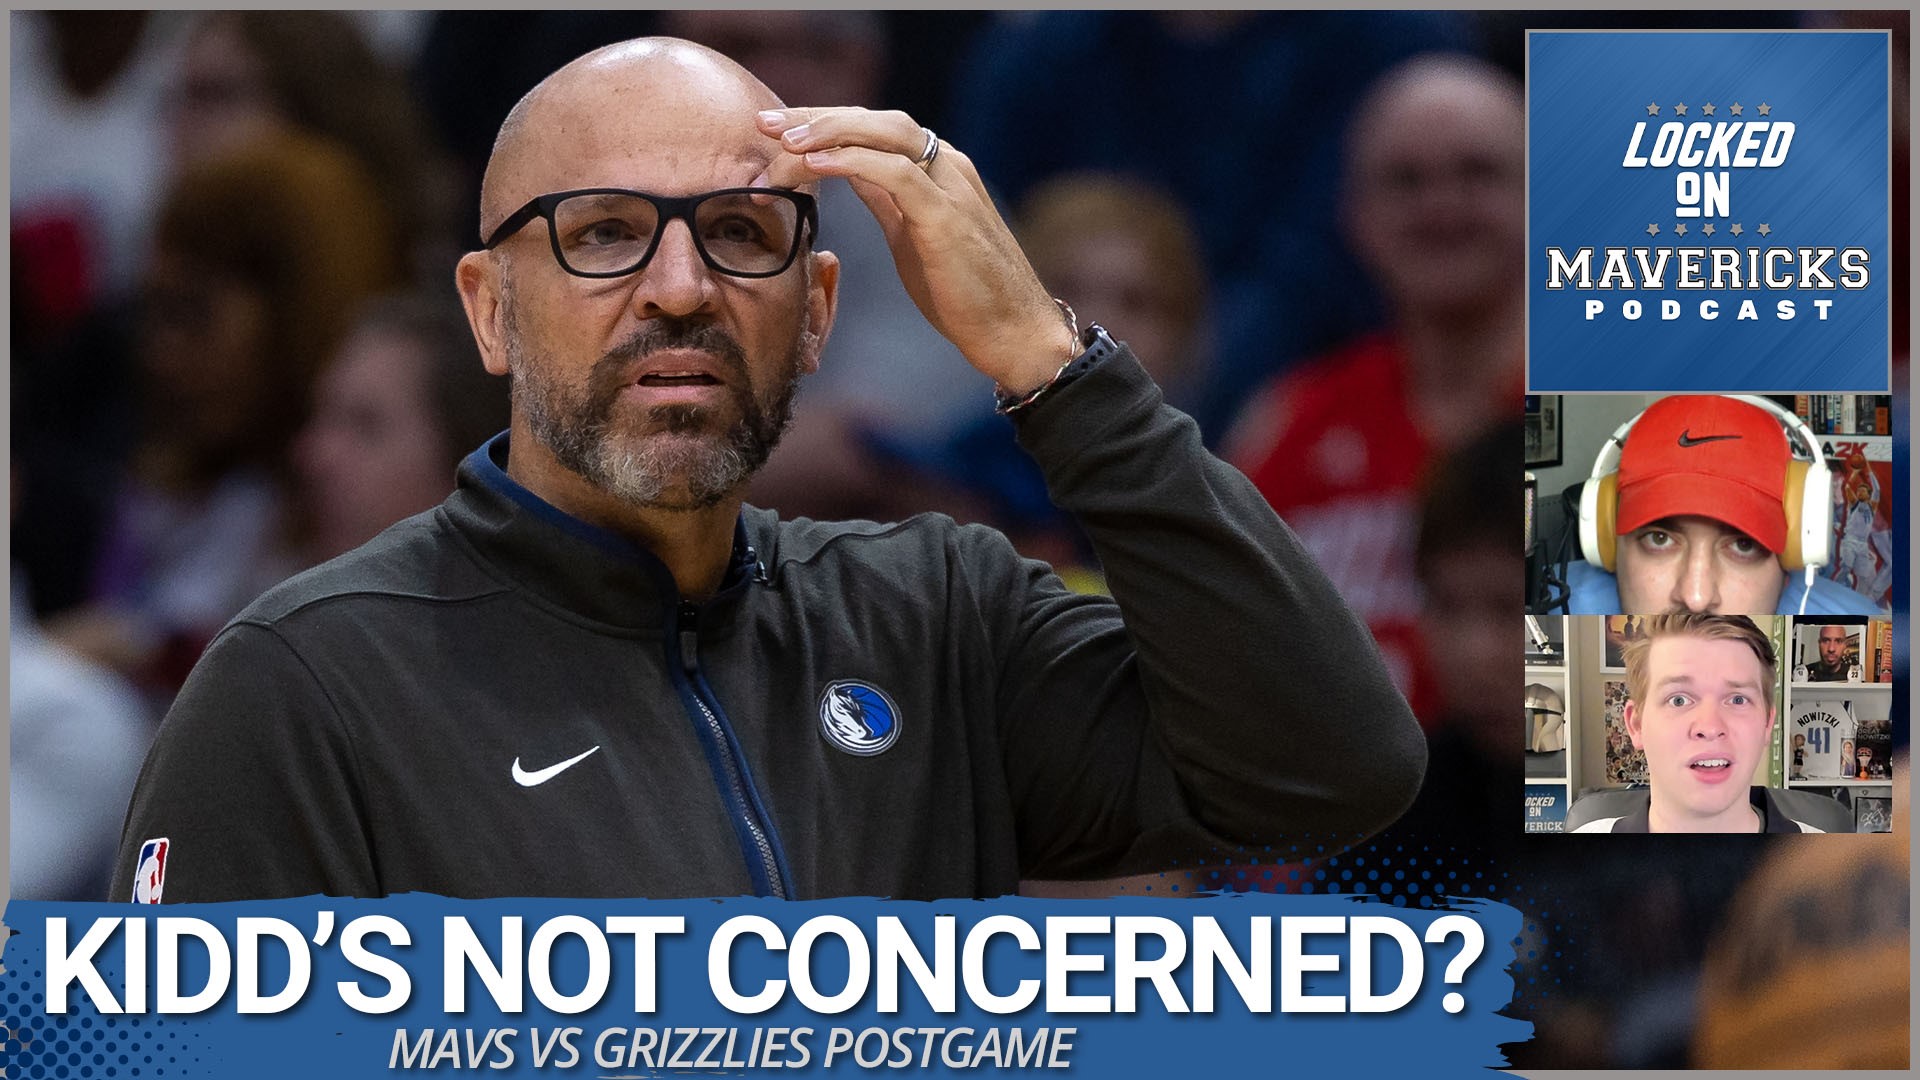 Nick Angsadt & Isaac Harris react to Jason Kidd's comments postgame and explain why there is reason to be concerned about the Mavs season.